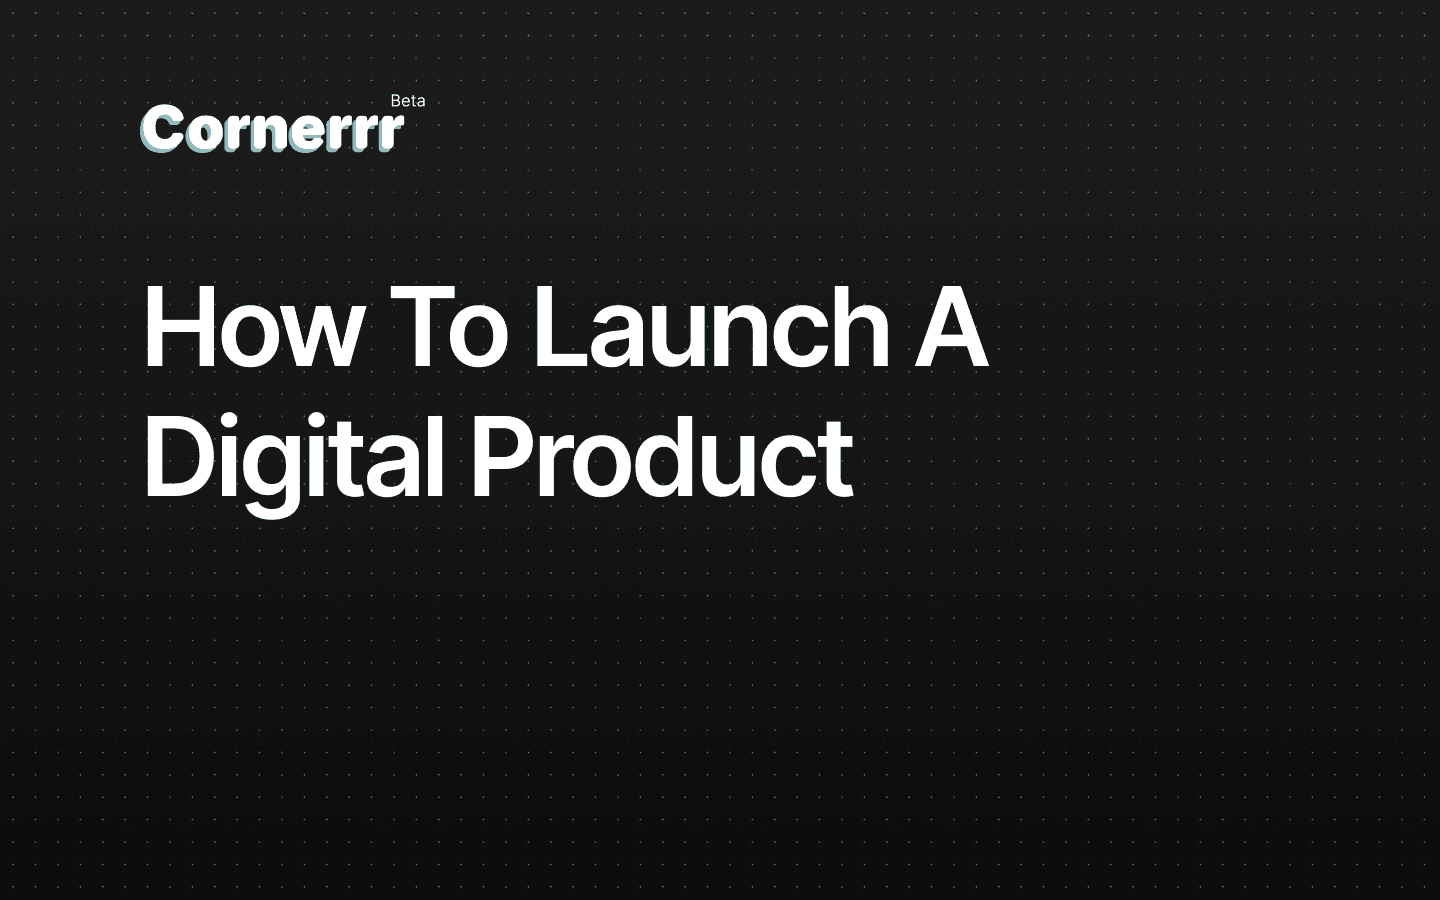 How to launch a digital product